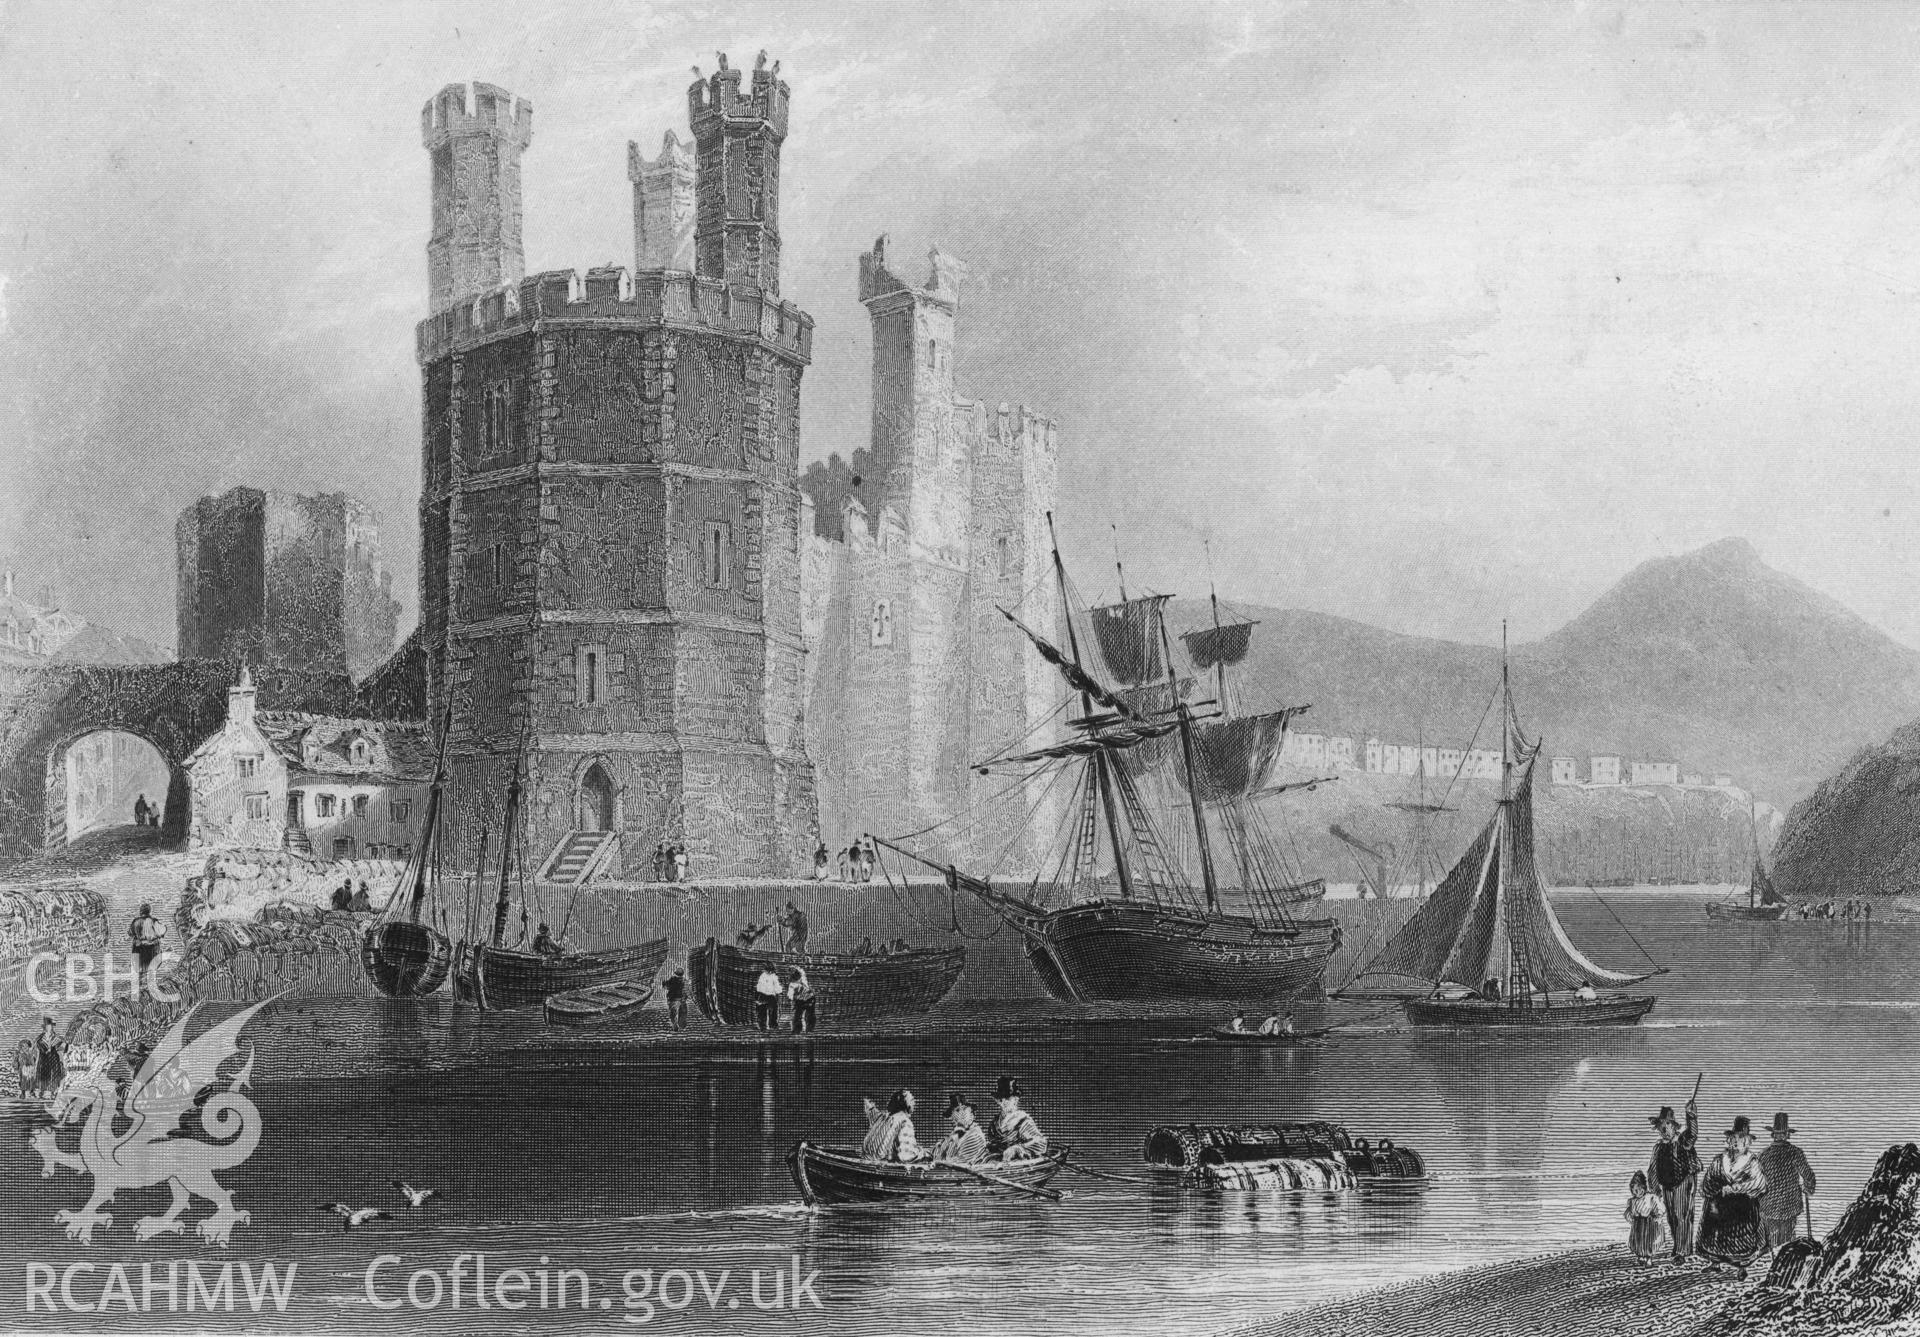 Caernarfon Castle; undated engraving showing the Eagle Tower, with ships and ferry in the foreground.